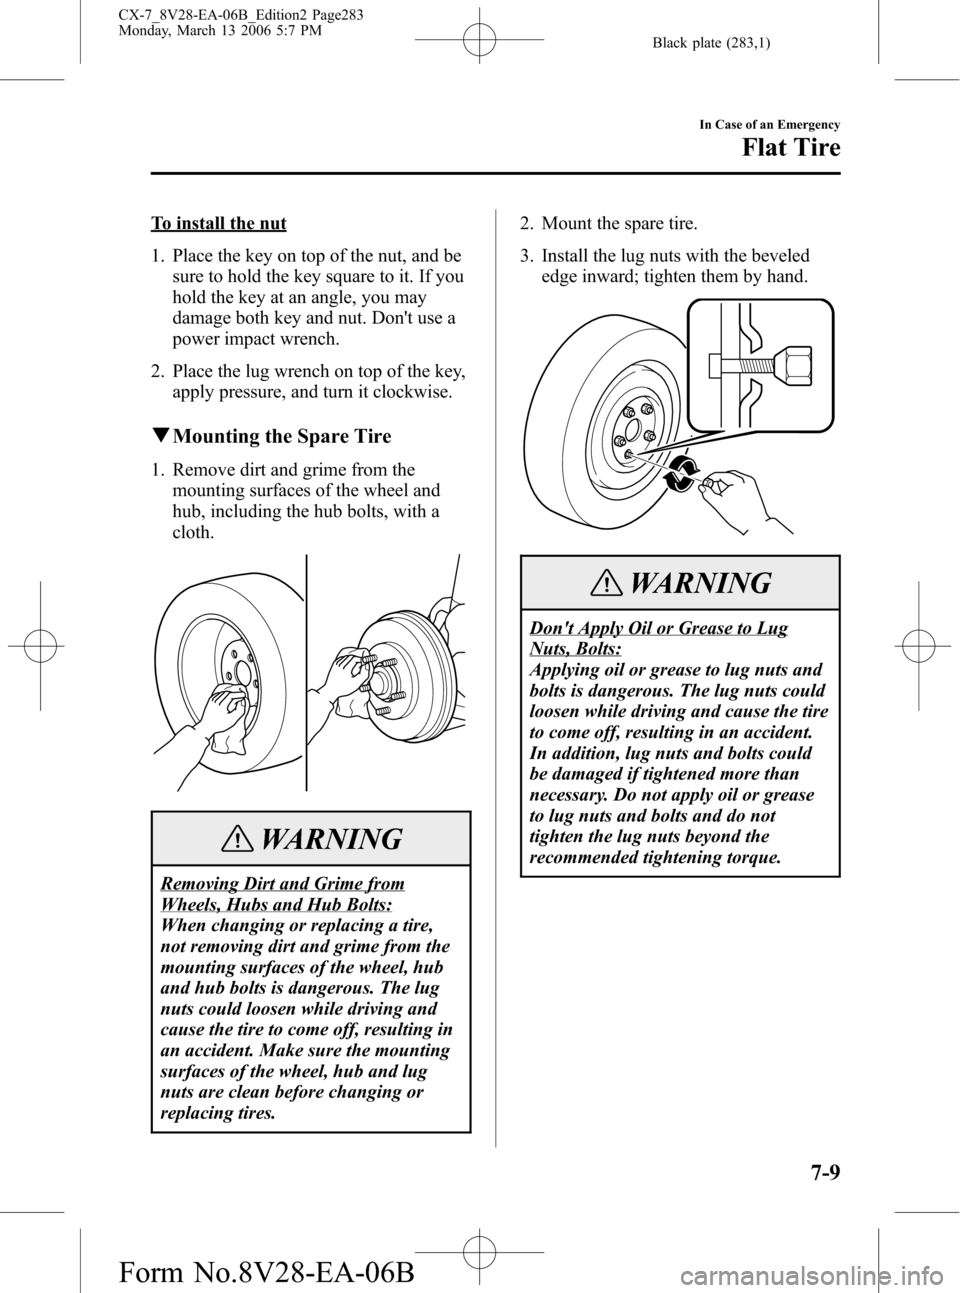 MAZDA MODEL CX-7 2007  Owners Manual (in English) Black plate (283,1)
To install the nut
1. Place the key on top of the nut, and be
sure to hold the key square to it. If you
hold the key at an angle, you may
damage both key and nut. Dont use a
power